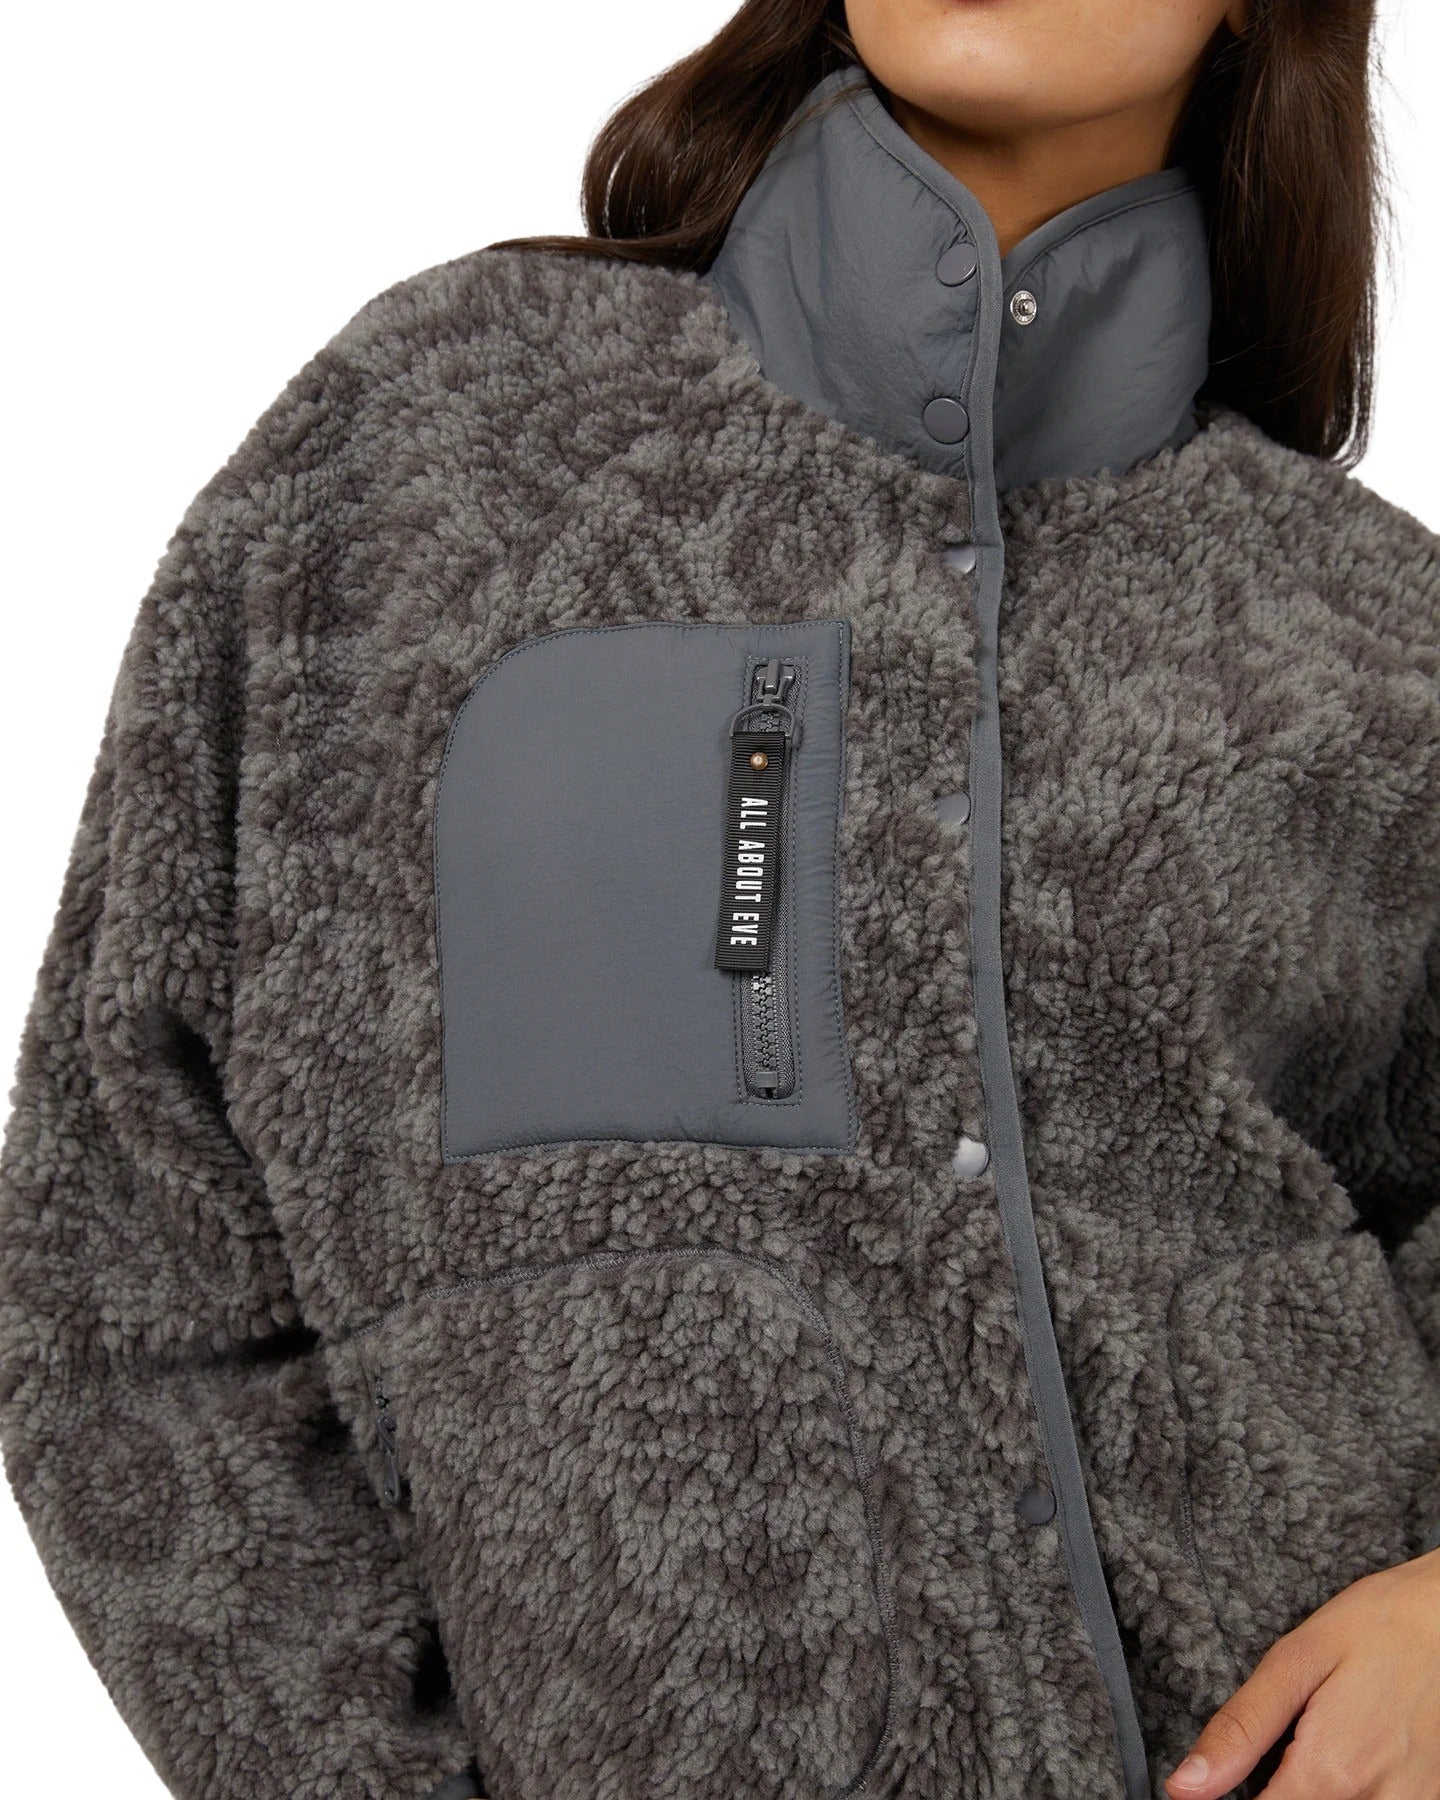 All About Eve - AAE Active Hiker Teddy Jacket - Print